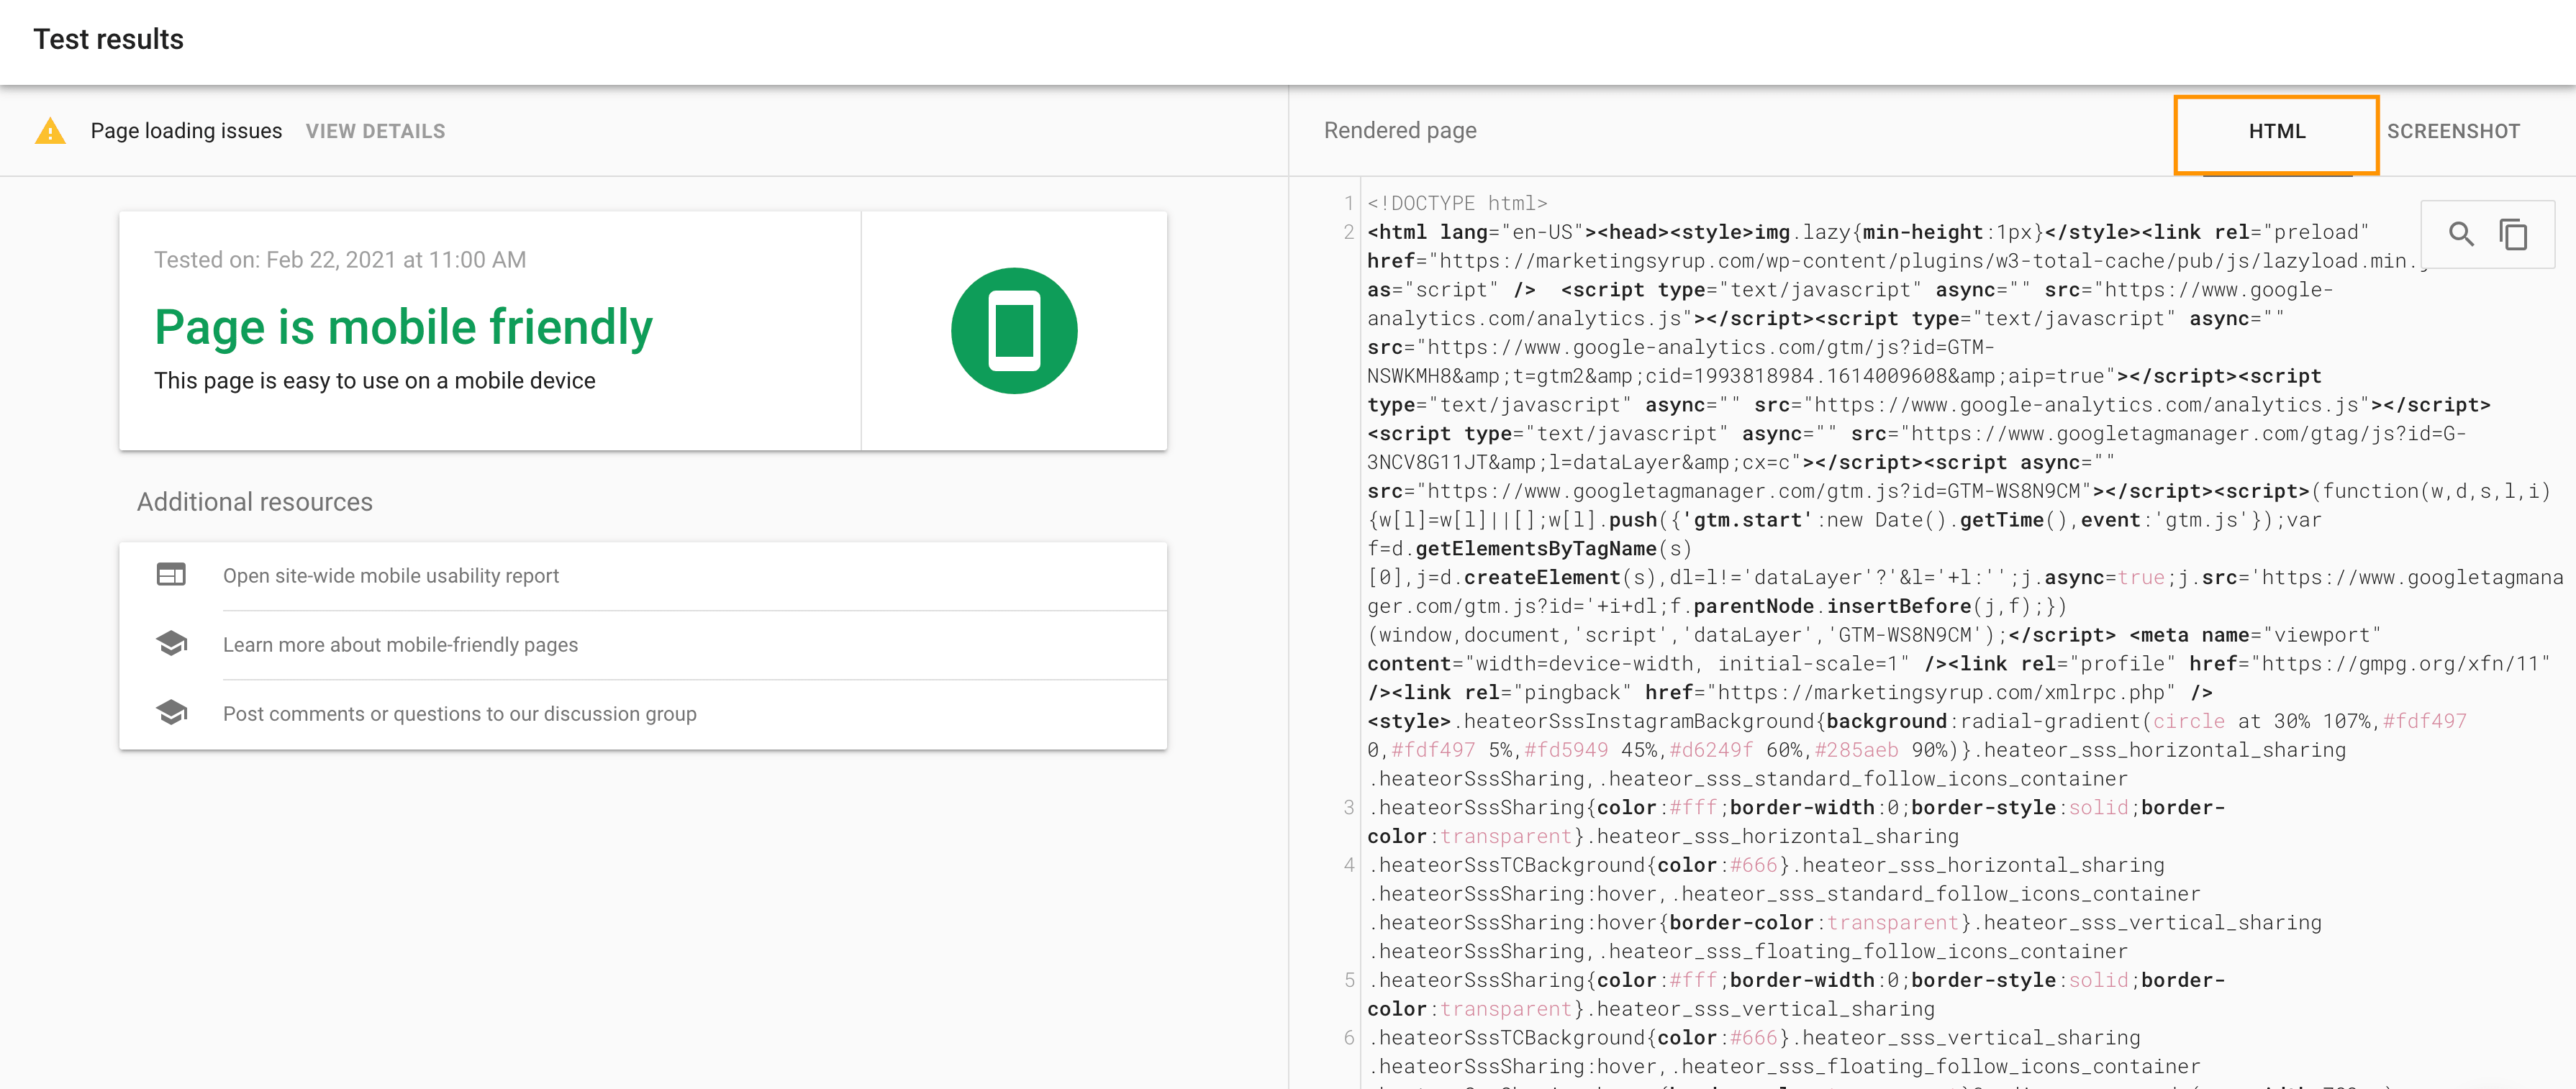 Google's Mobile-friendly Test Tool HTML check